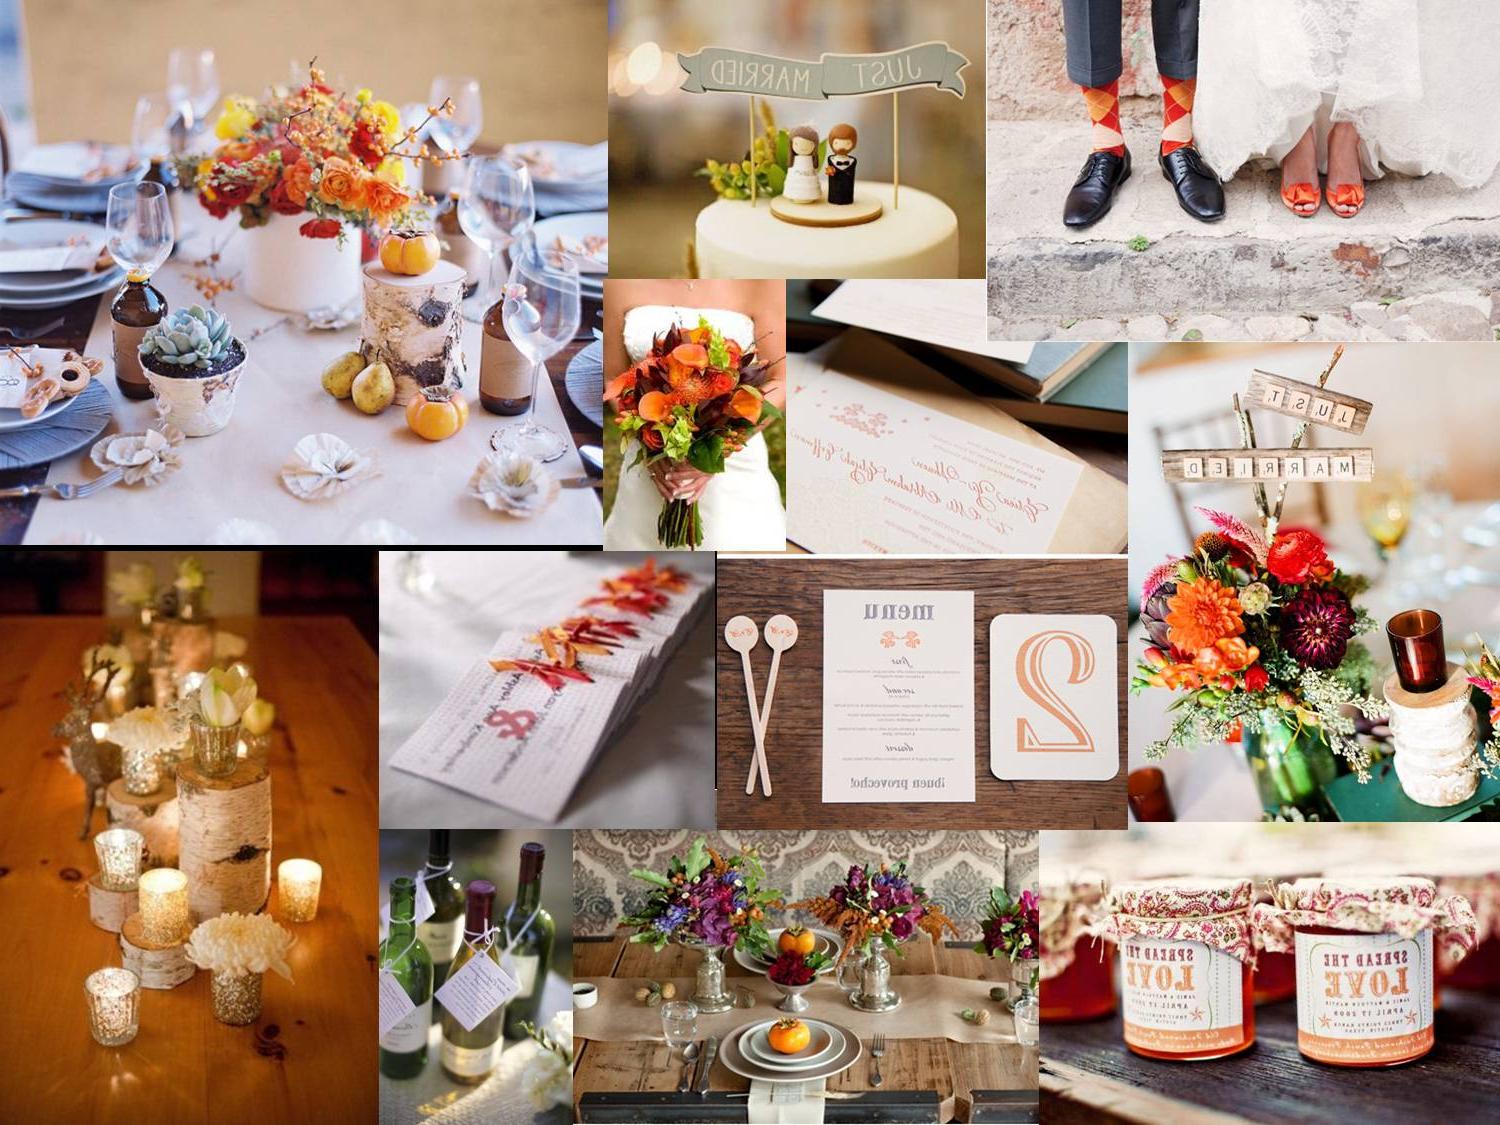 Table setting via Snippet